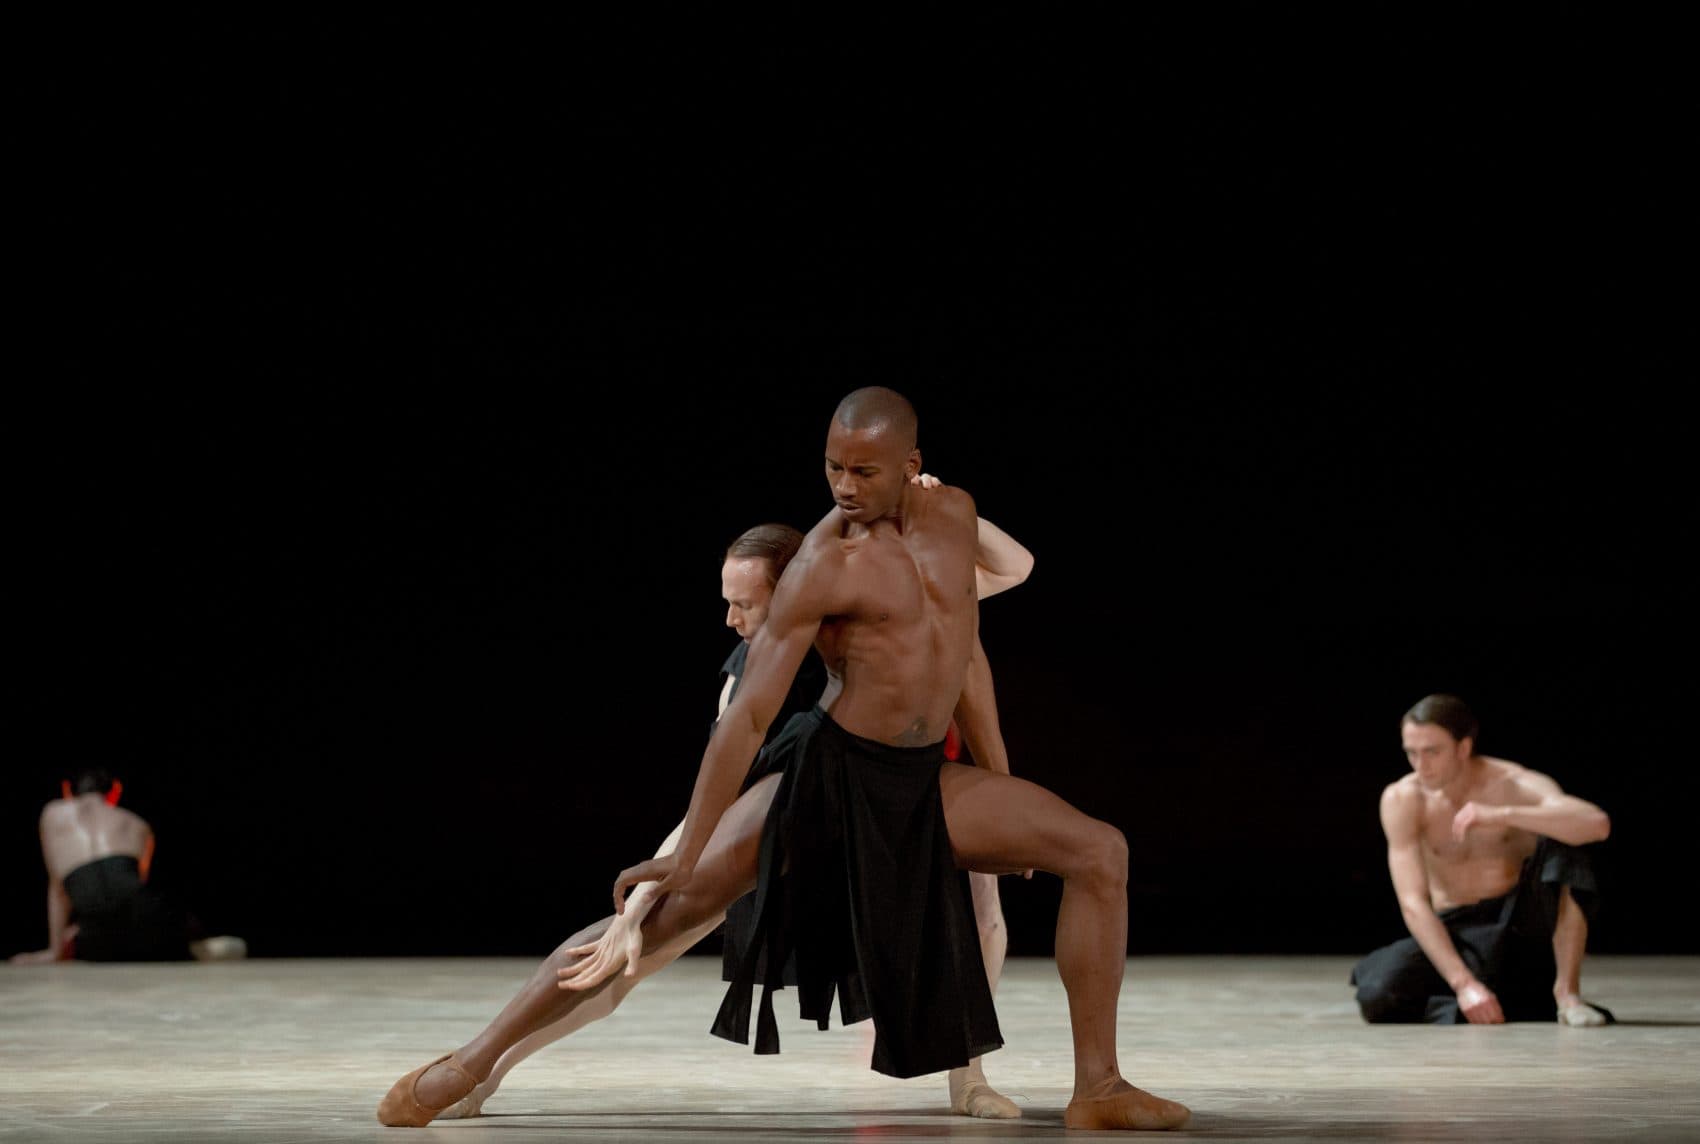 Royal Ballet principal dancer Edward Watson and soloist Eric Underwood in Wayne McGregor's "Obsidian Tear," which is coming to Boston this season. (Courtesy Andrej Uspenski/The Royal Ballet)